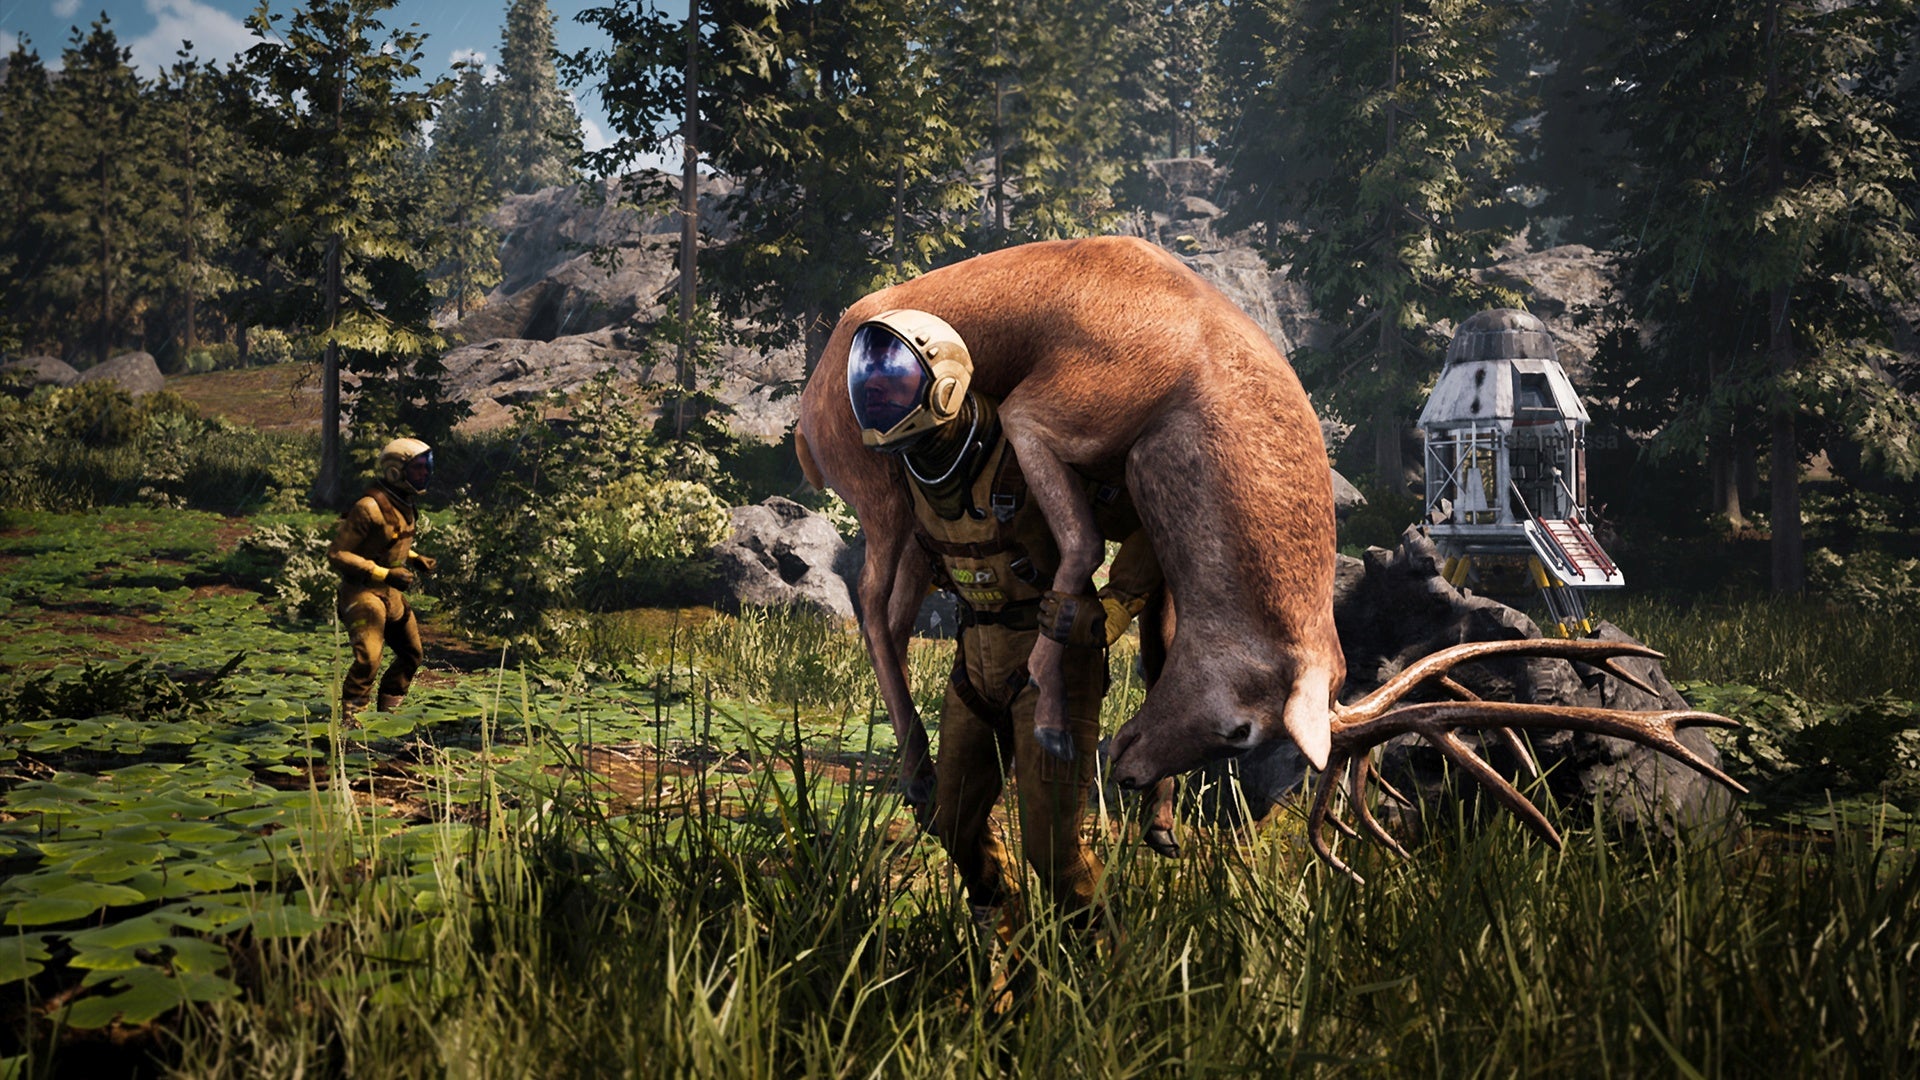 A screenshot of Icarus showing a man in a spacesuit carrying a deer on his shoulders, with a drop pod and a lot of trees in the background.